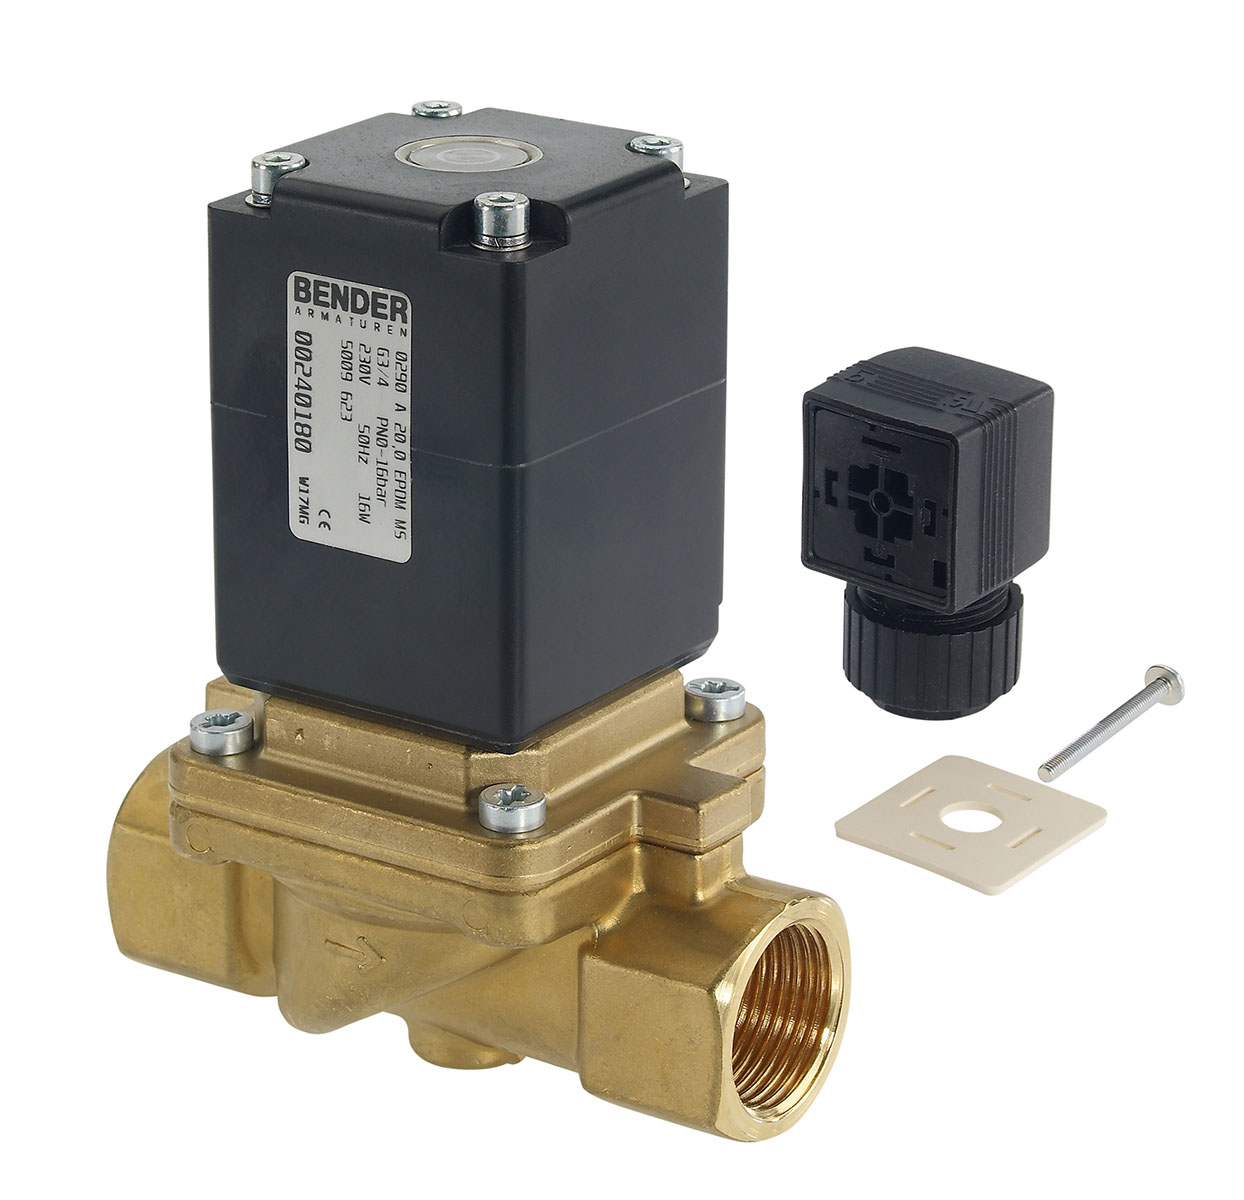 5009637 - 2/2 way solenoid valve normally closed for not flammable gas and fluids Type 6; female thread